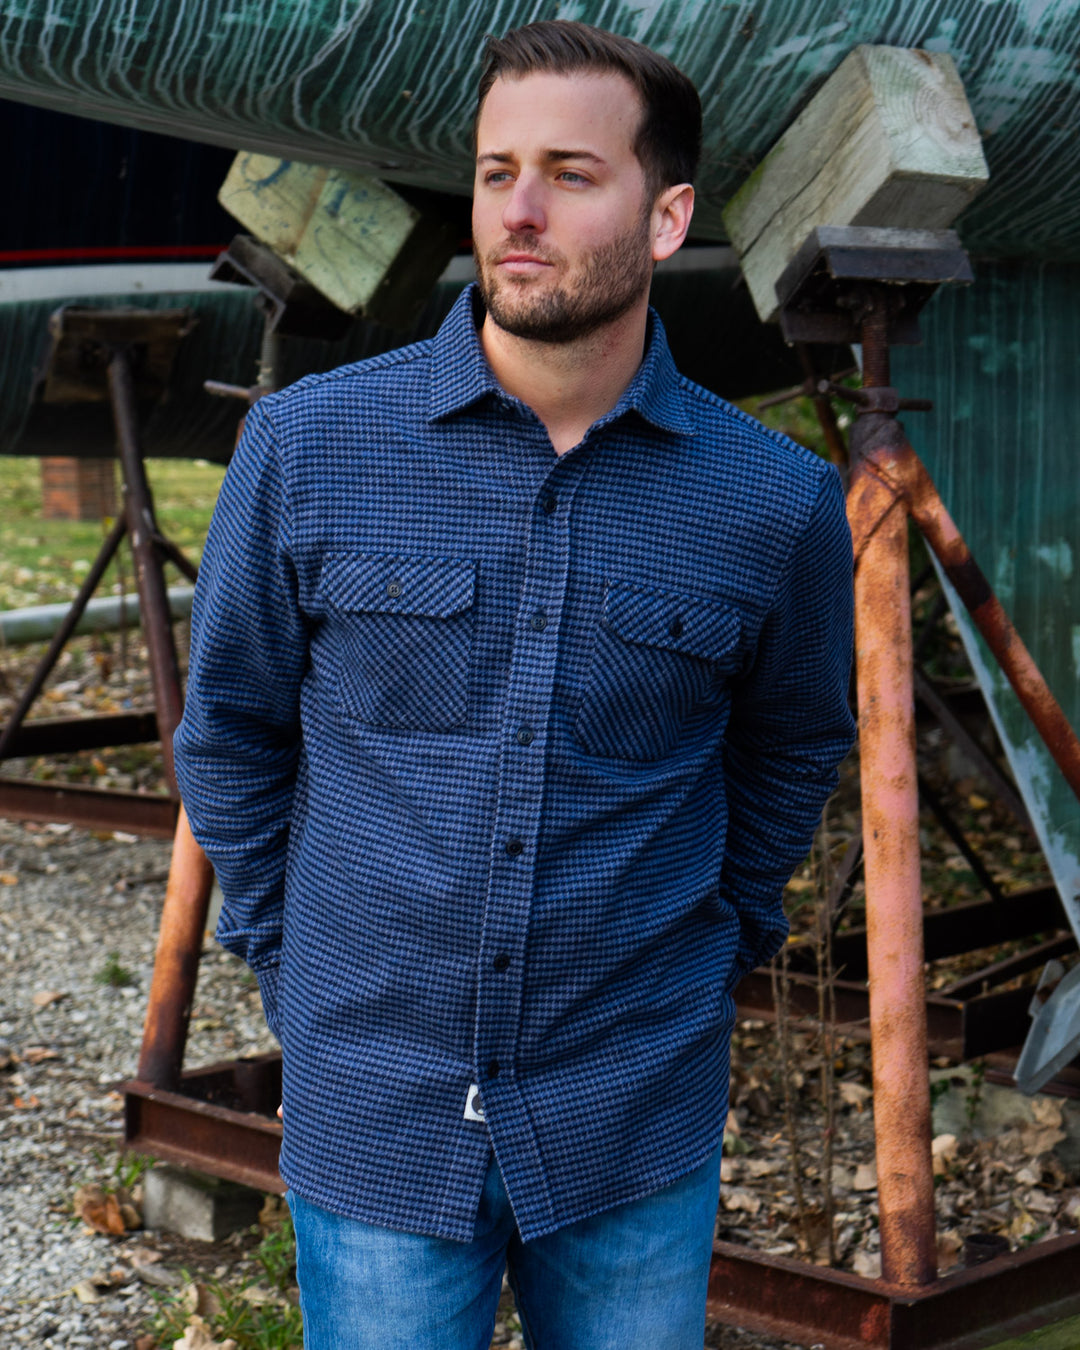 Heavywelght Flannel Shirt for Men by Muskox Flannels, Thick 100% Cotton Flannel Shirt in Dark Blue Check